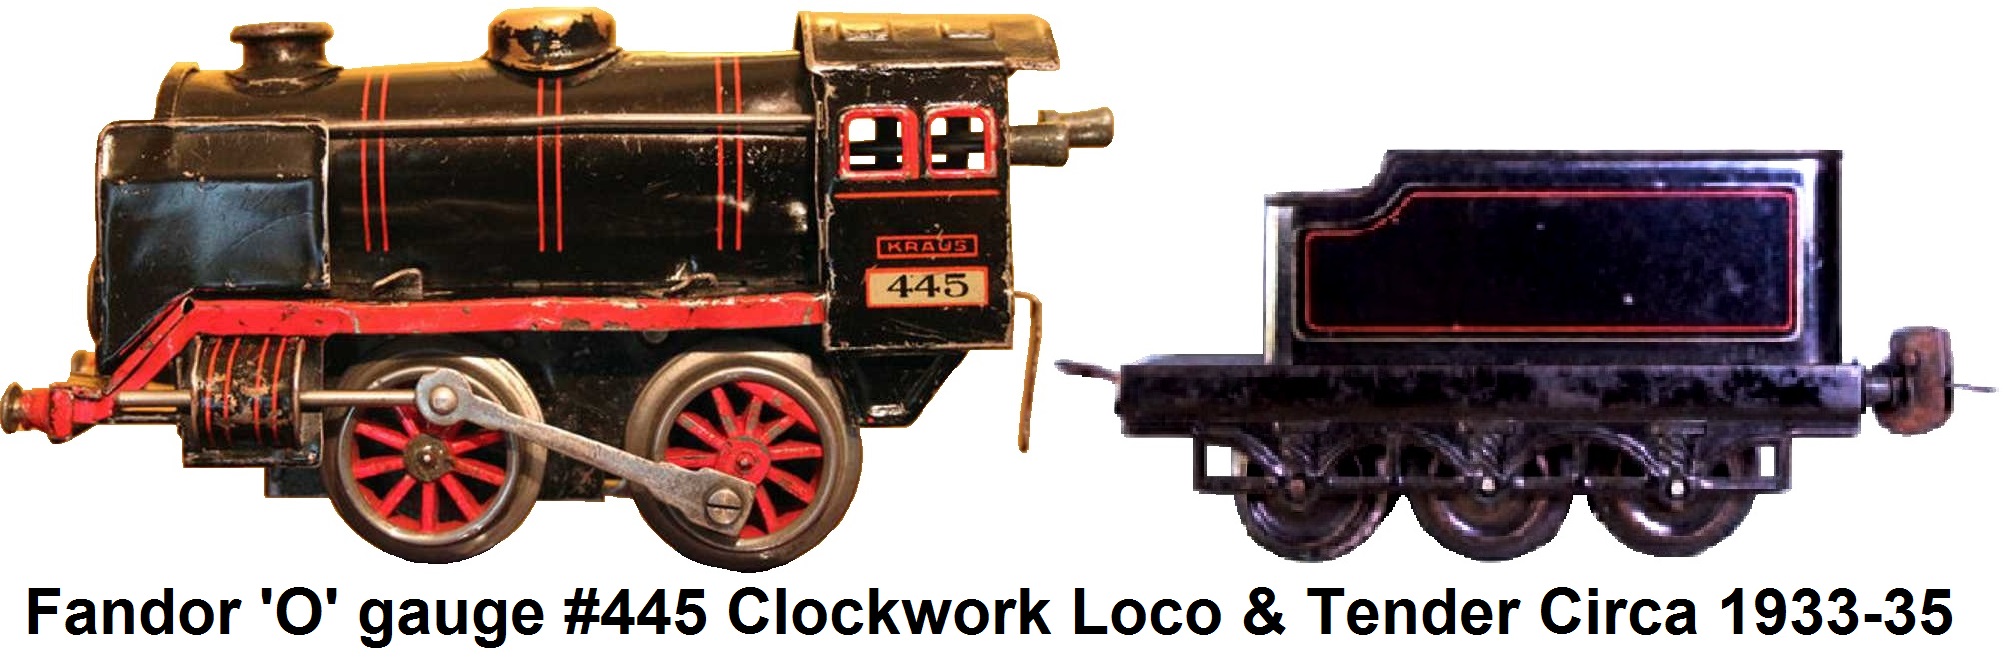 Kraus-Fandor 'O' gauge clockwork Steam outline locomotive lithographed in black, with deflector, red pinstripes, gallery rods, chimney and dome circa 1933-35